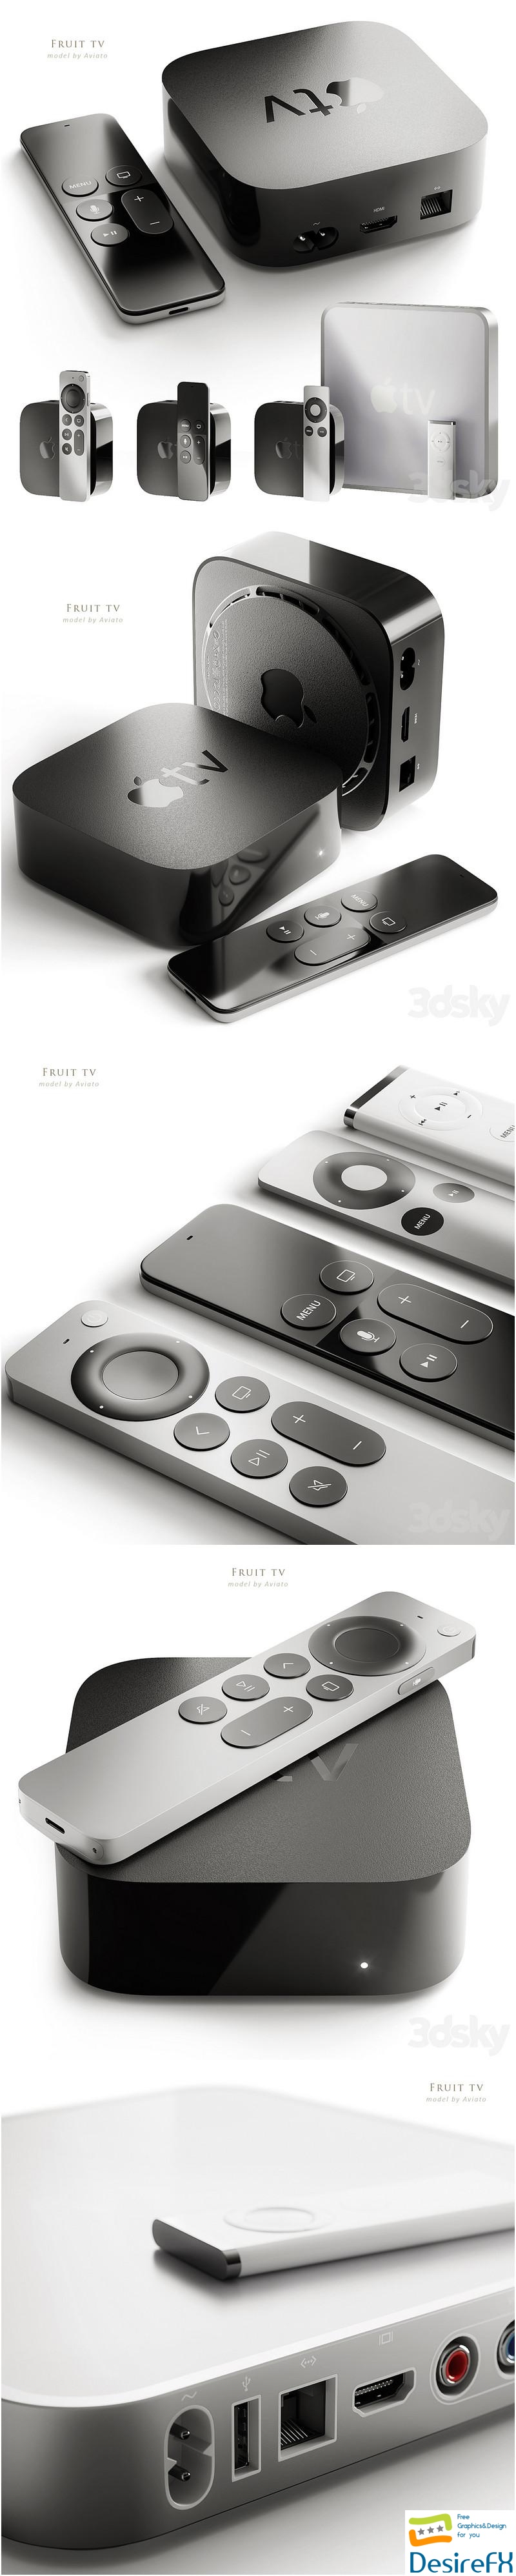 Apple TV collection 3D Model